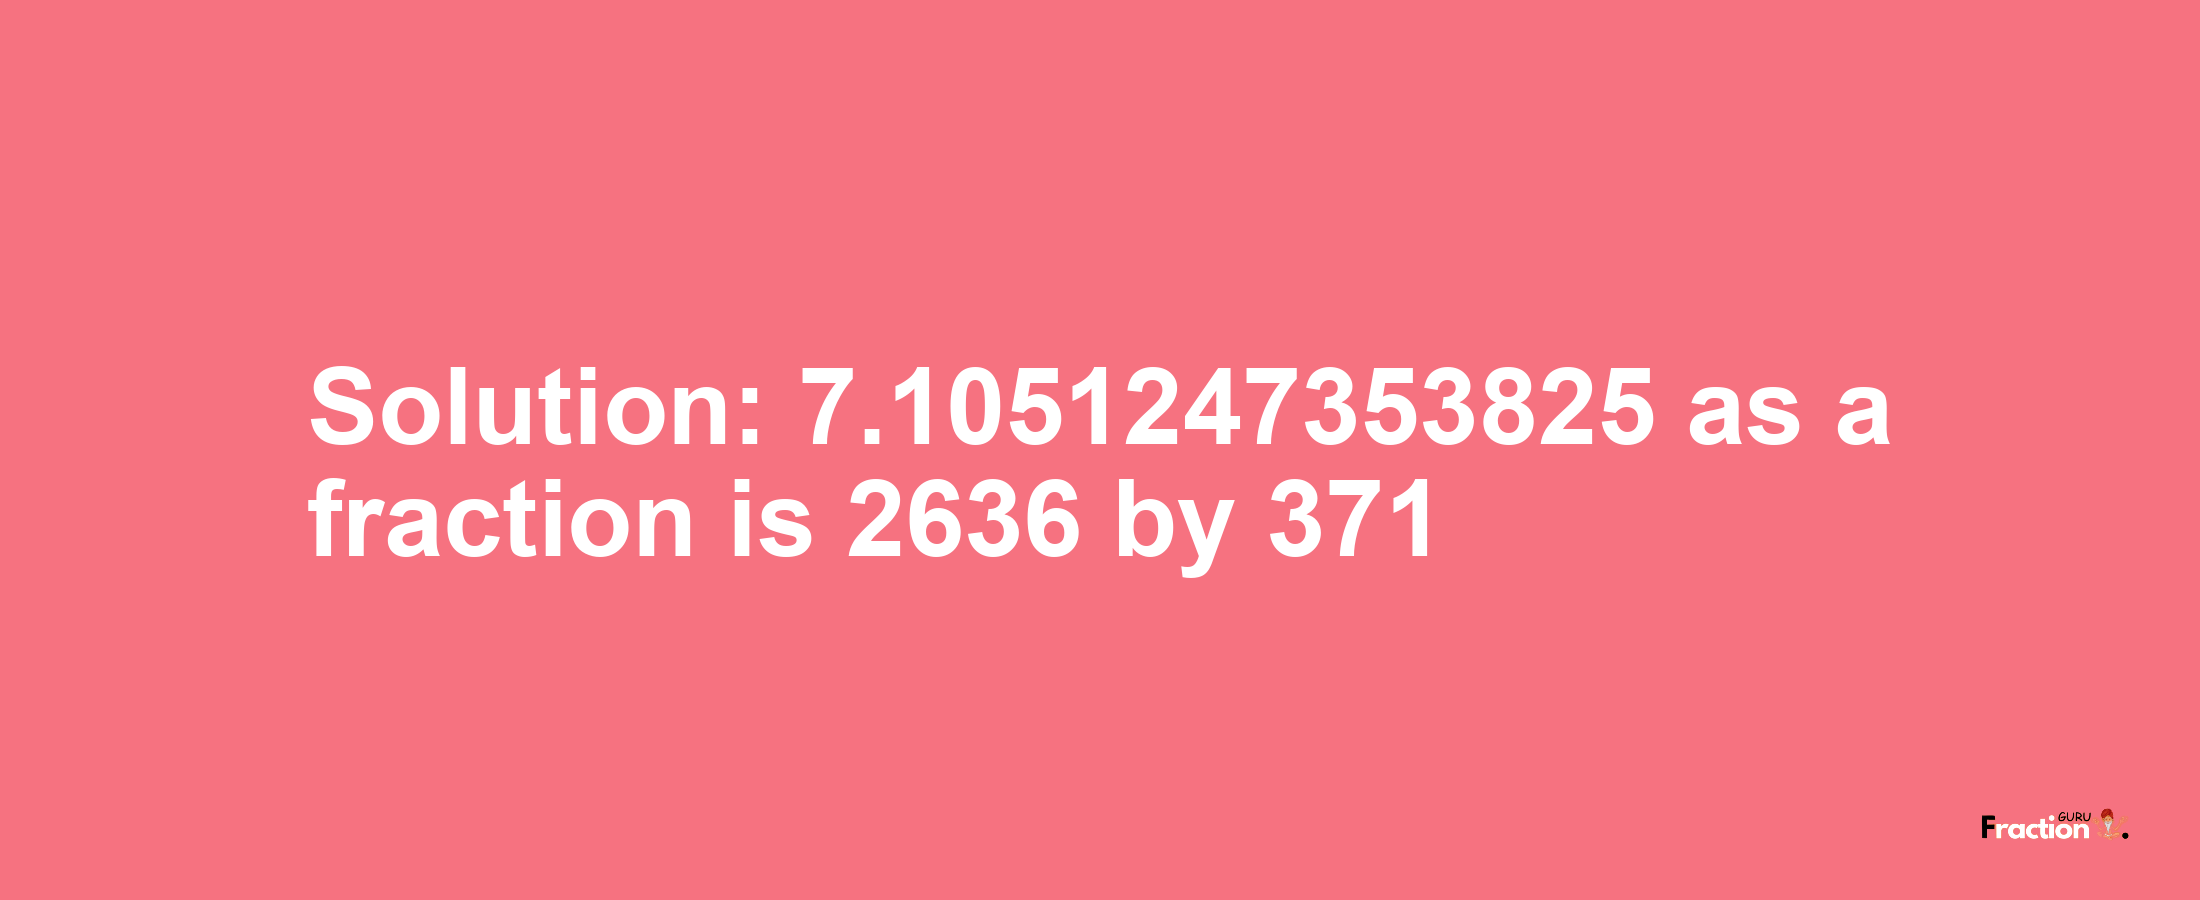 Solution:7.1051247353825 as a fraction is 2636/371